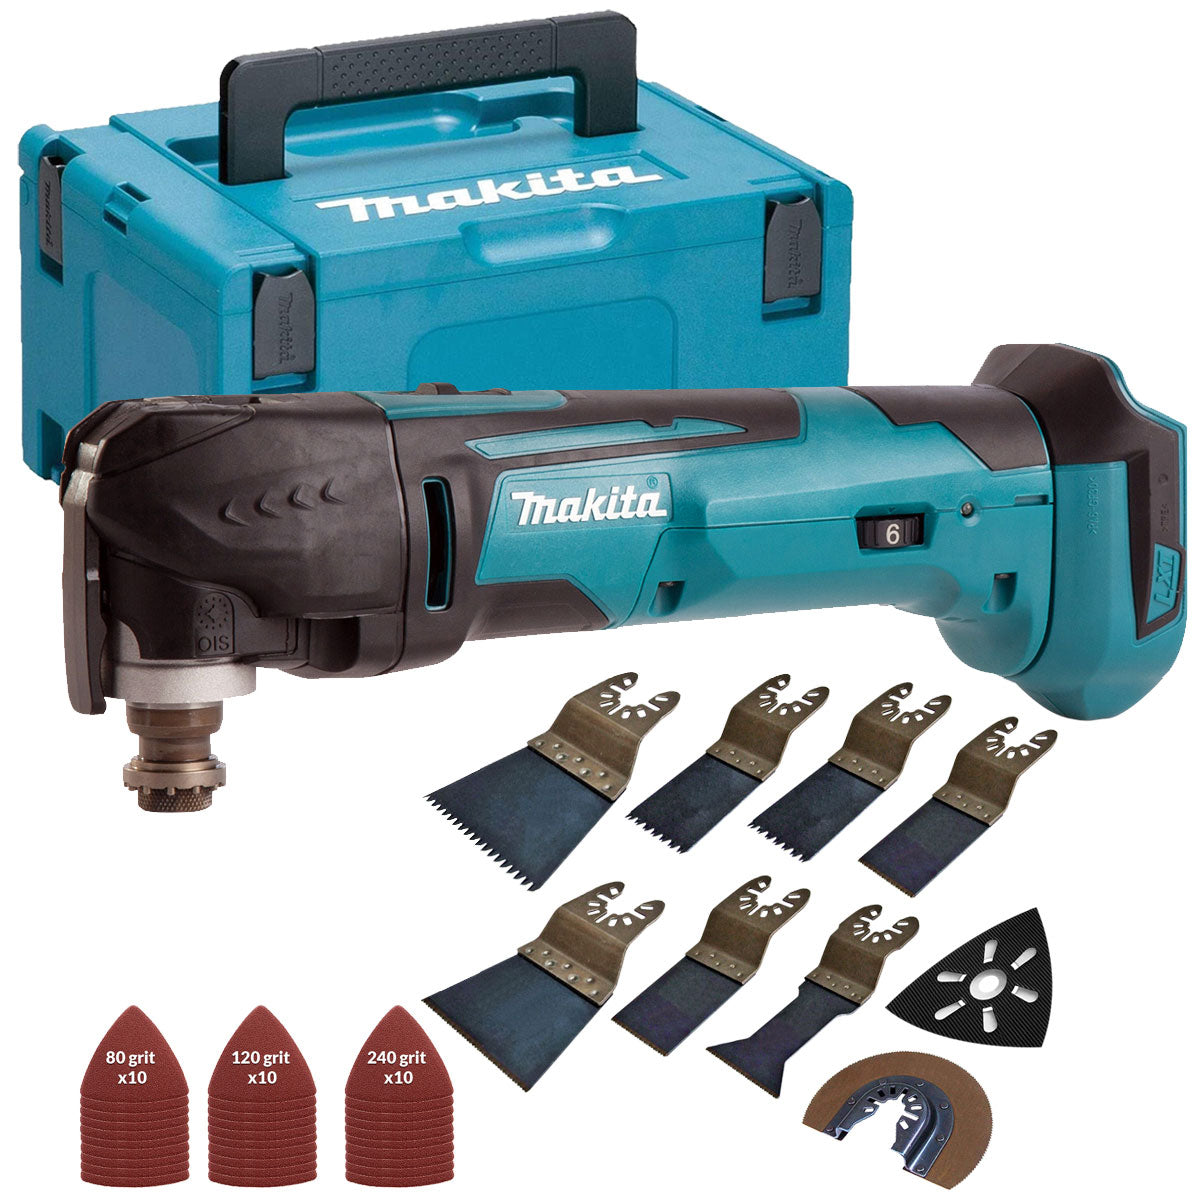 Makita DTM51Z LXT 18V Oscillating Multitool with 39 Piece Accessories Set & Makpac Case